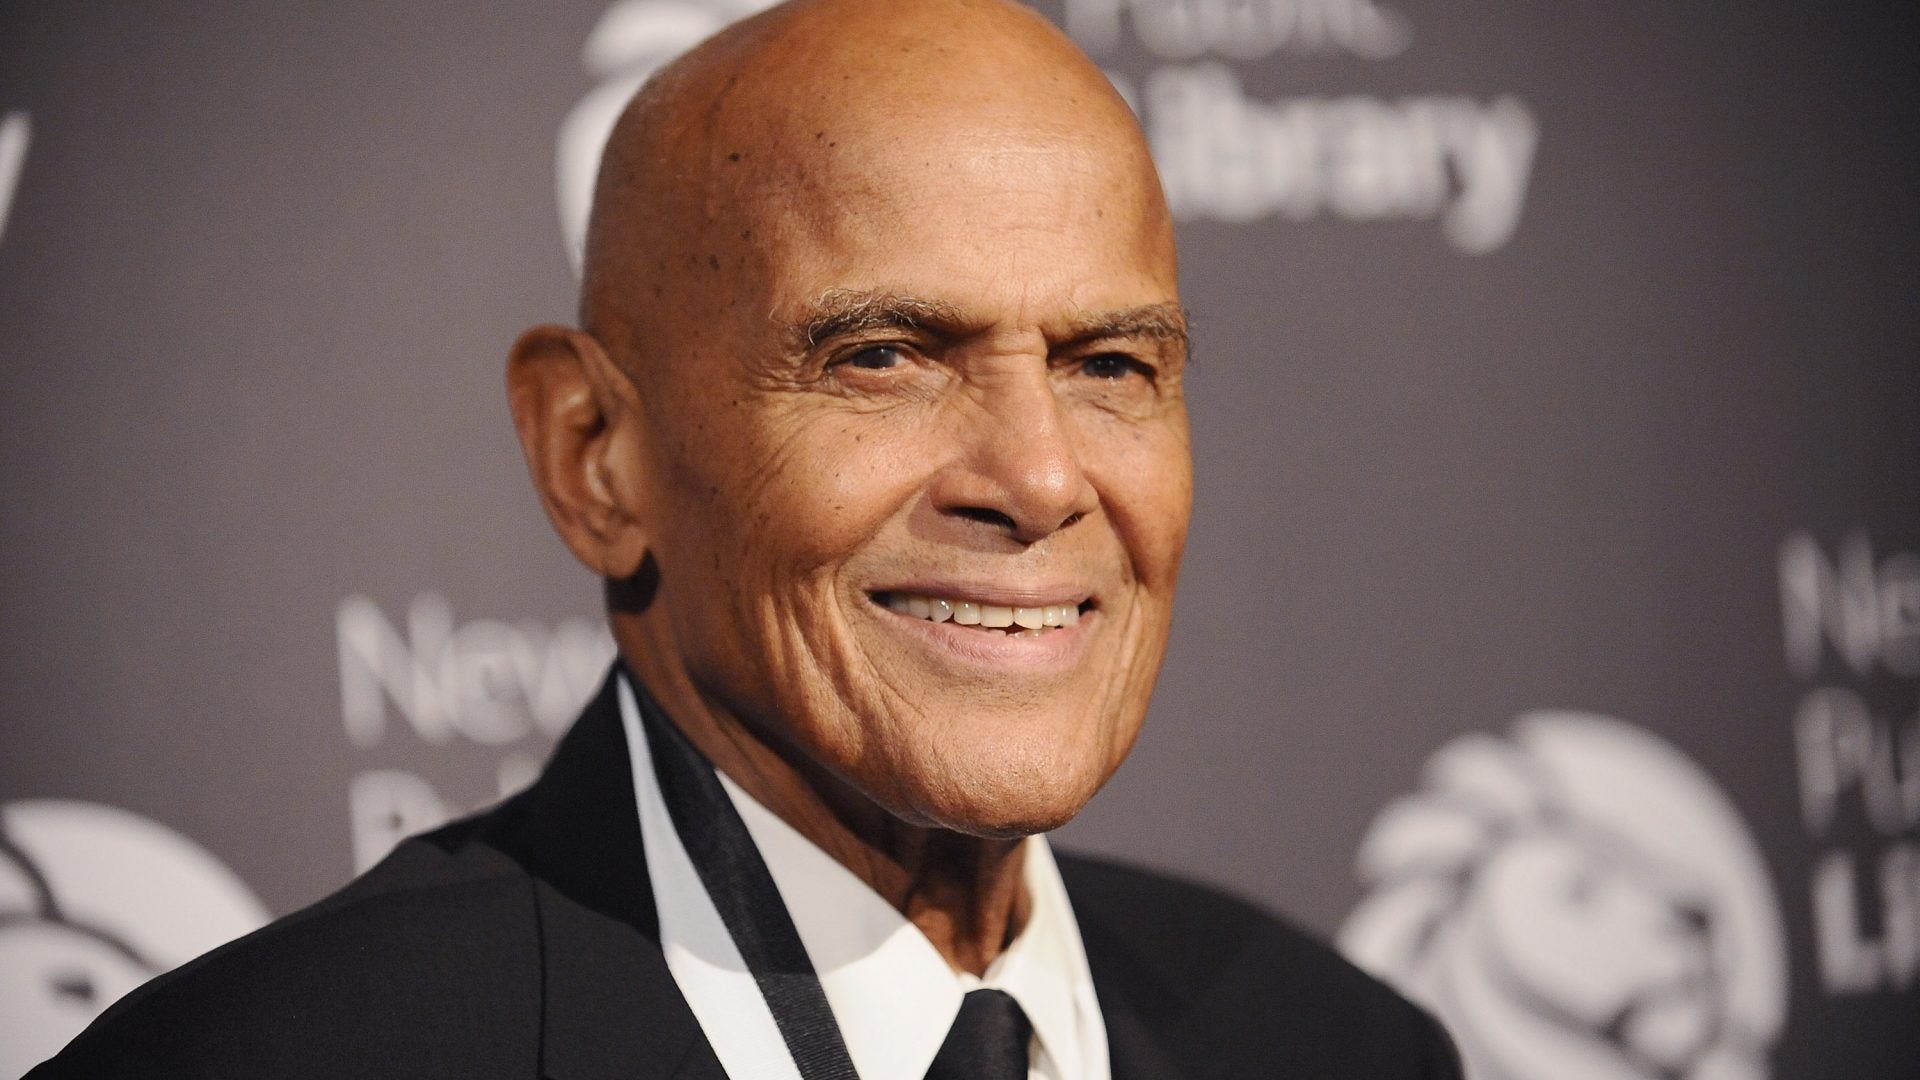 How Old Is Belafonte